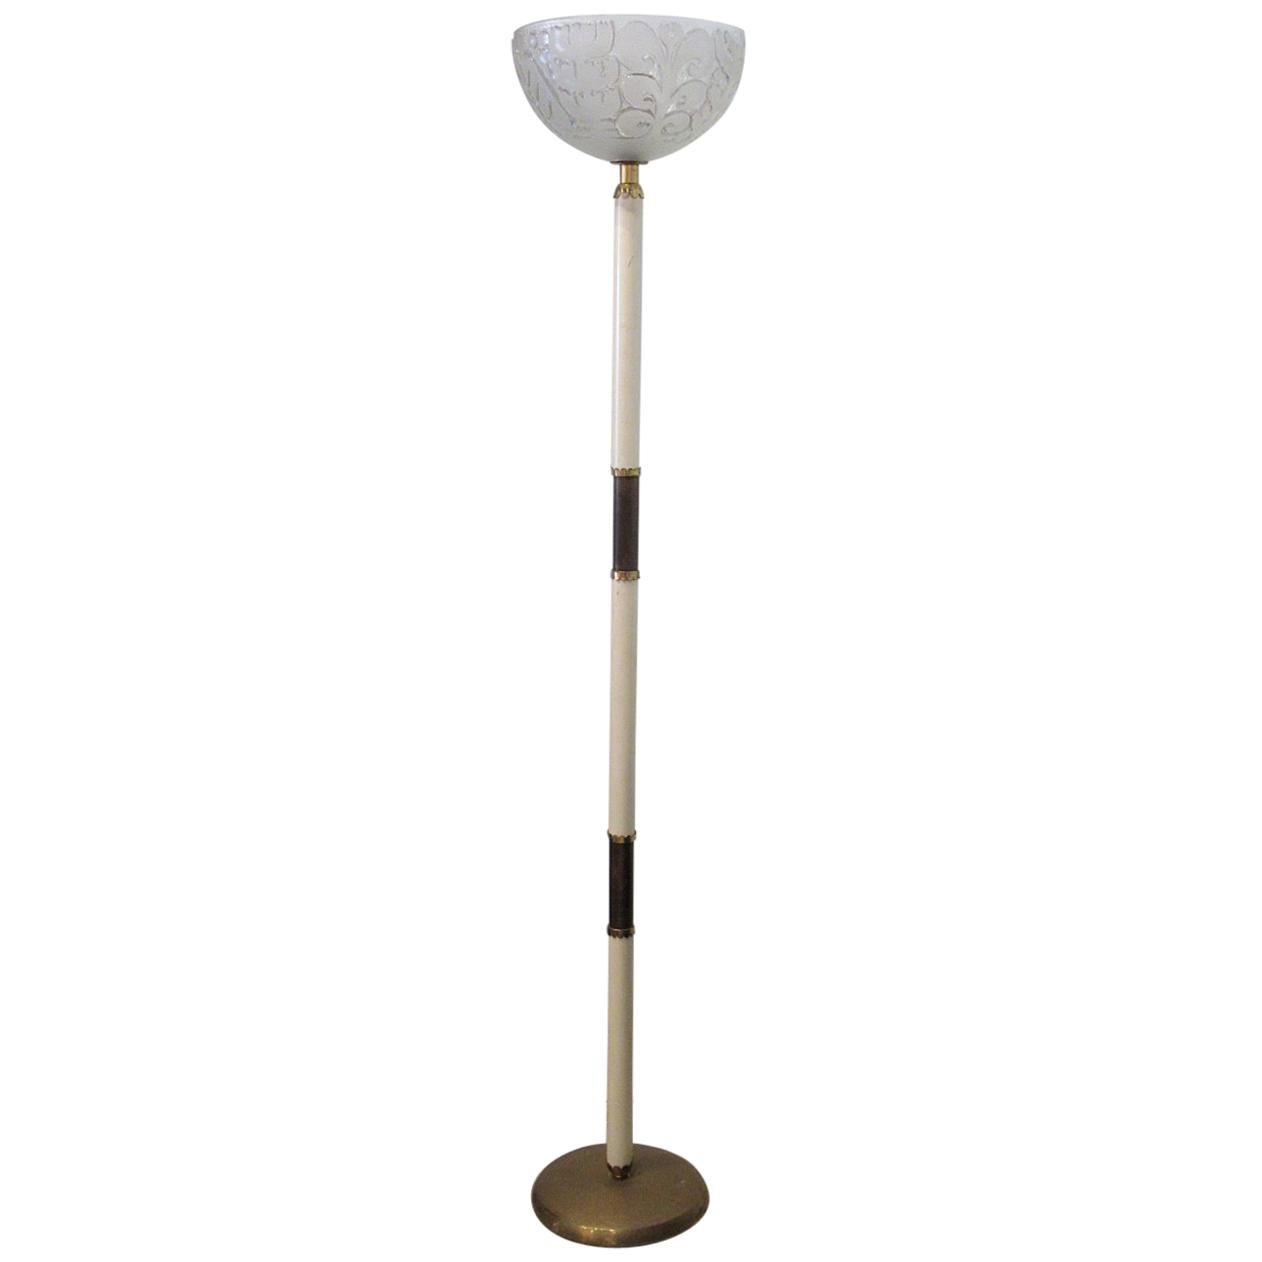 Fine Italian Modern Parchment, Brass and Glass Floor Lamp, Sabino, 1950s For Sale